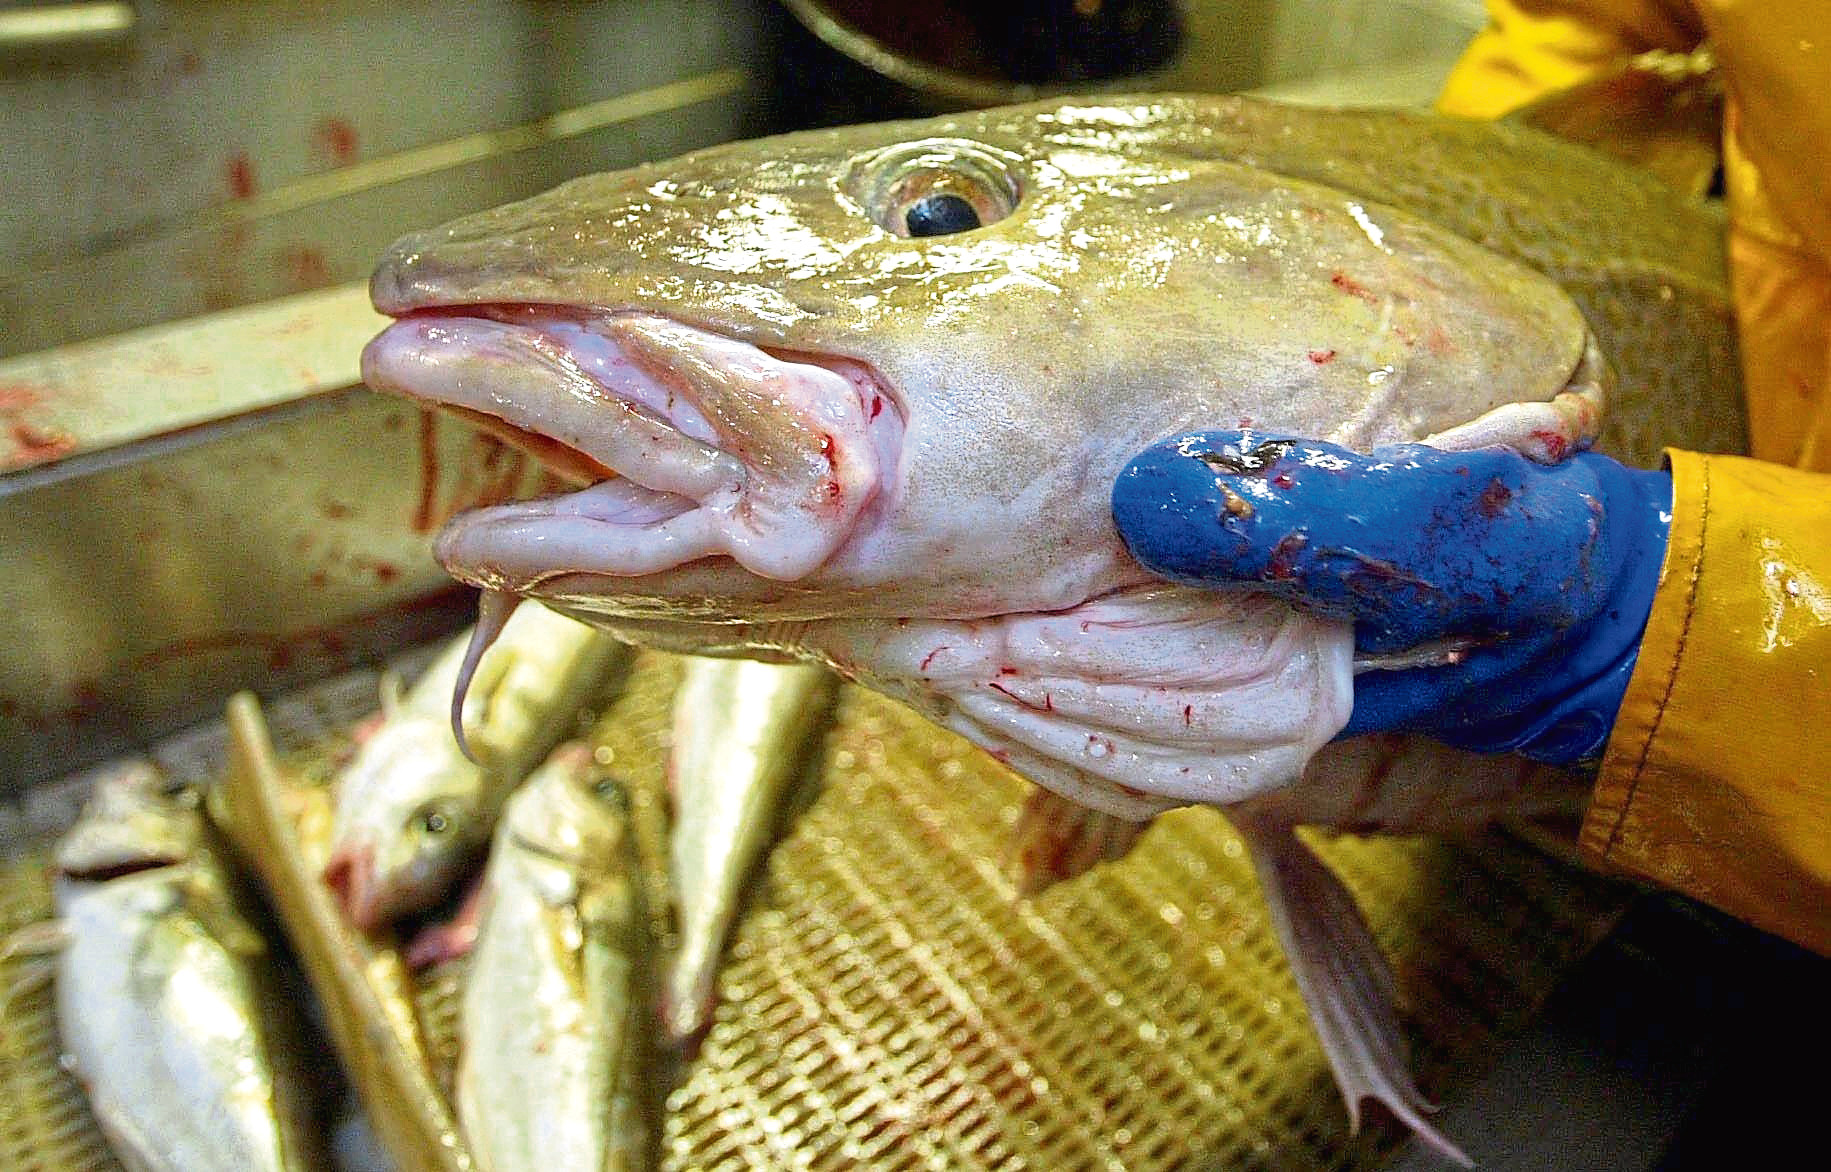 Cod caught by a pair-trawled catch from between Norway and the Shetland Islands in the North Sea.